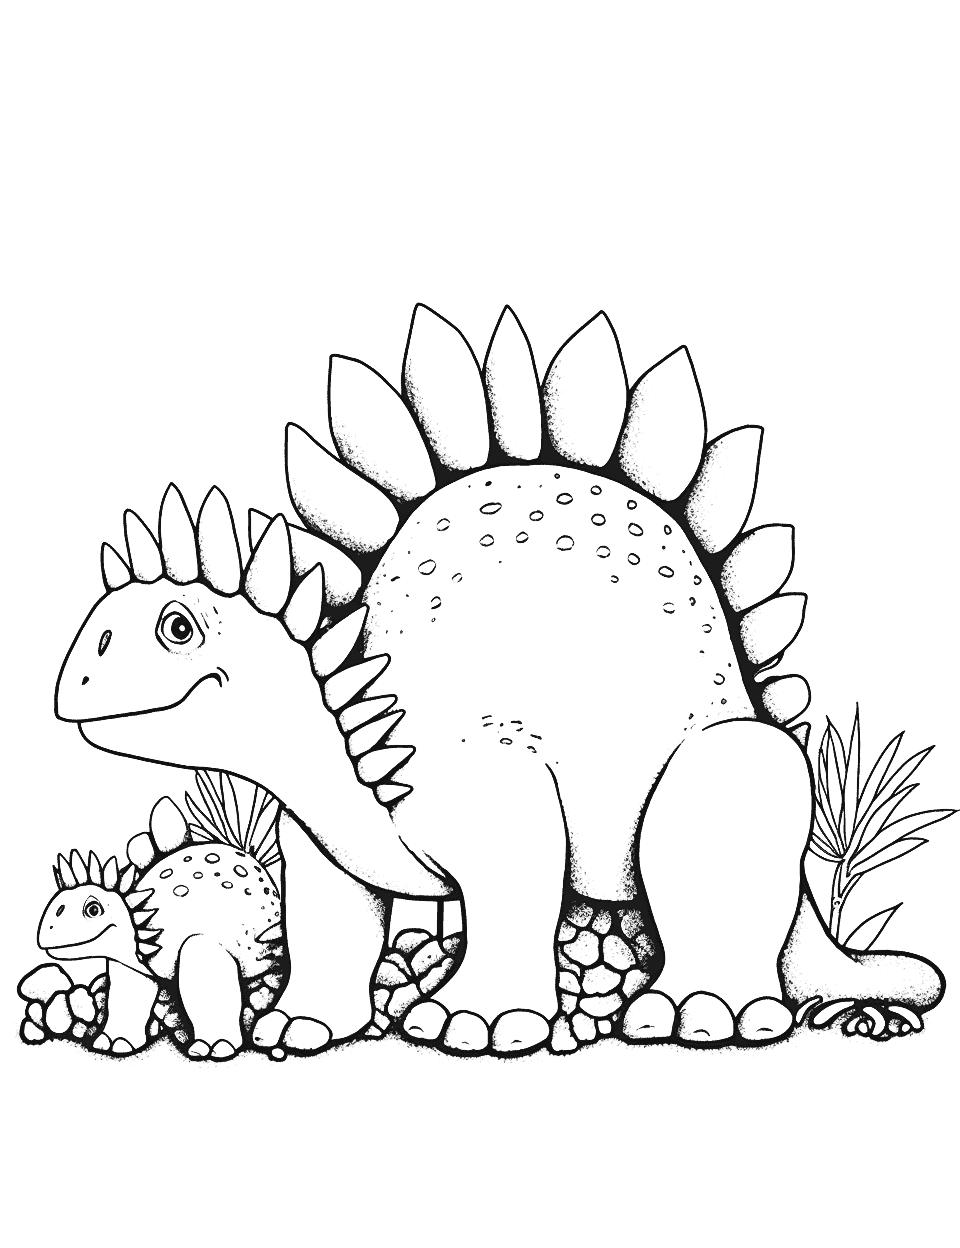 Stegosaurus Family Coloring Page - A family of Stegosaurus grazing peacefully.